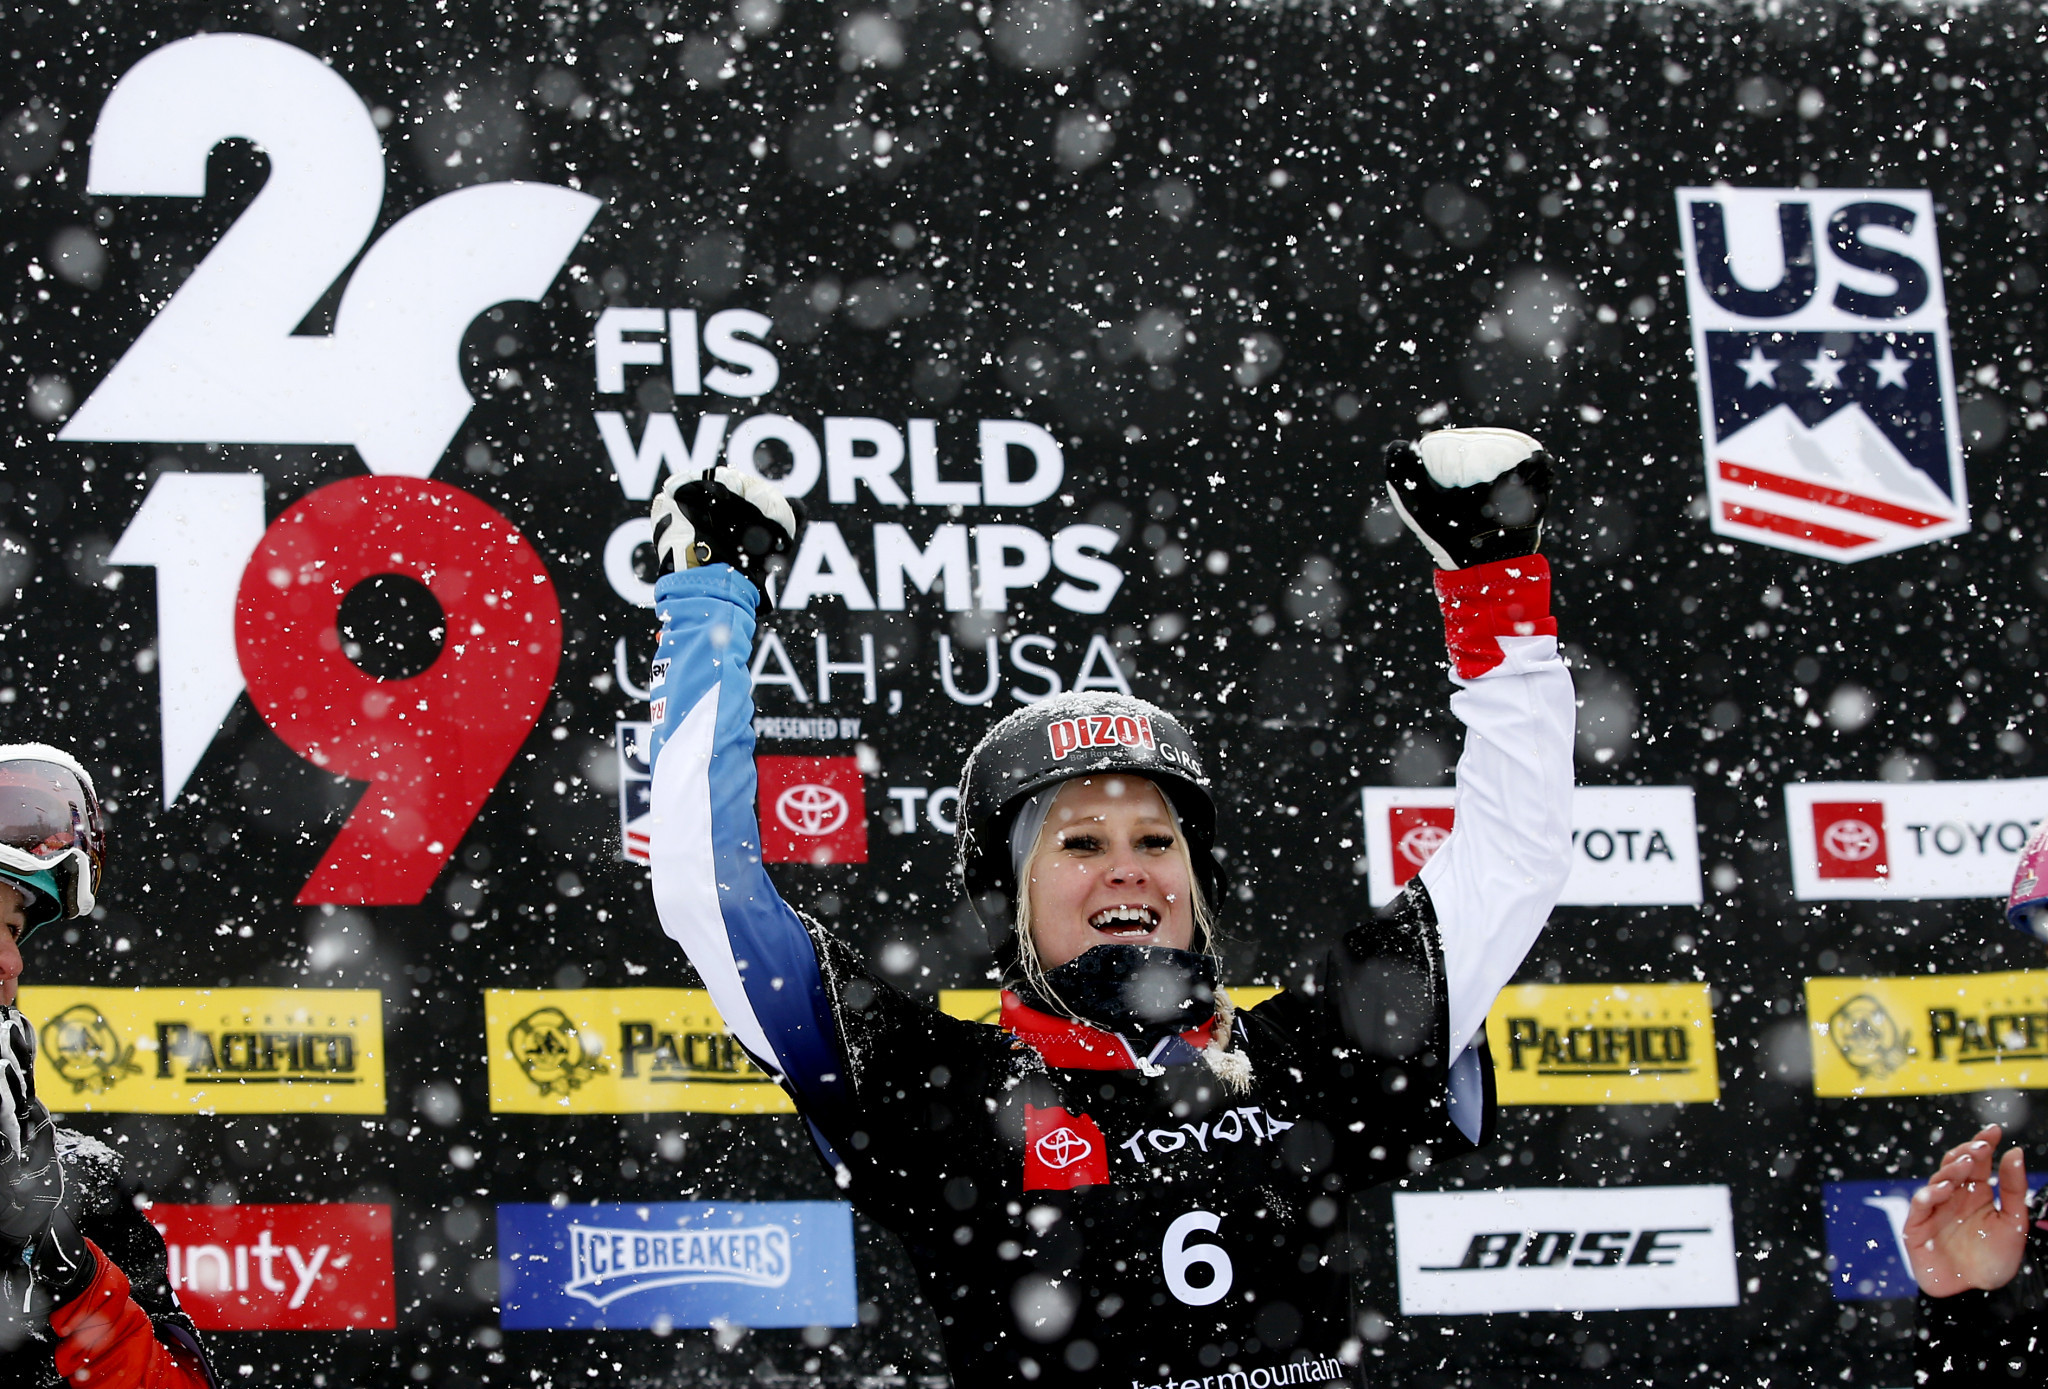 Zogg on course for season-ending crystal globe at Winterberg parallel slalom World Cup